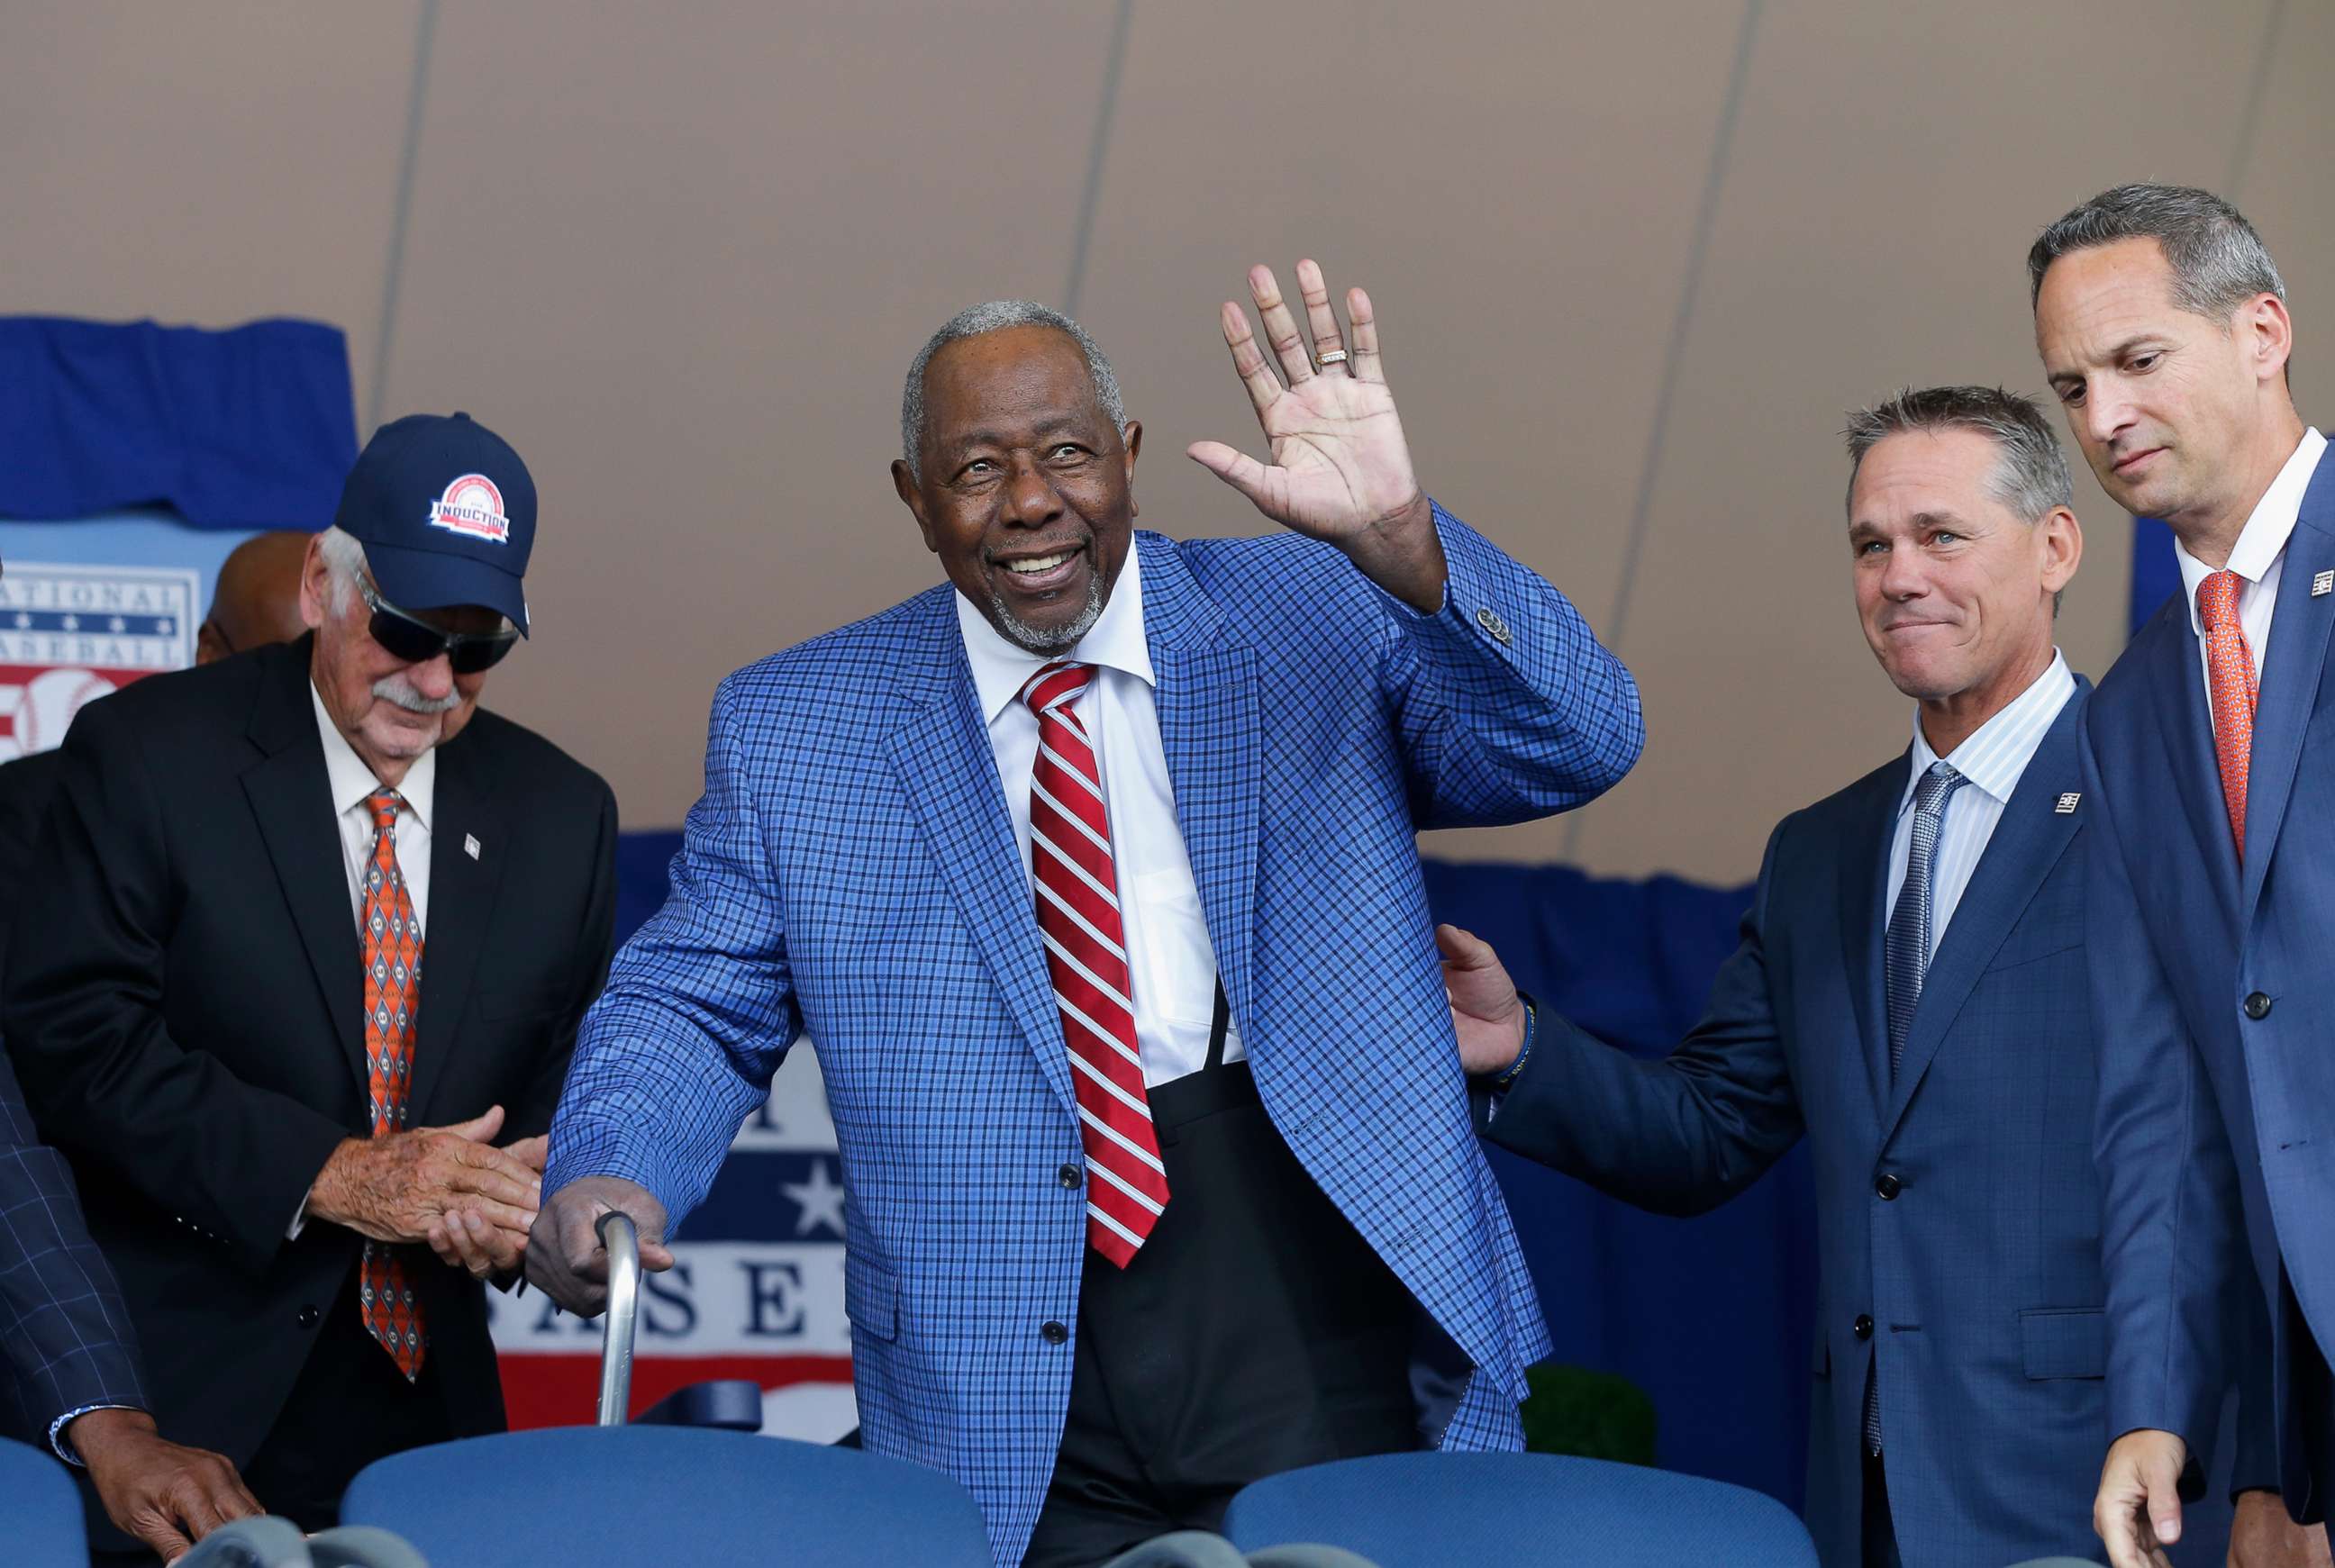 PHOTO: Baseball icon Henry Aaron is introduced during the Baseball Hall of Fame induction ceremony on July 29, 2018 in Cooperstown, New York.